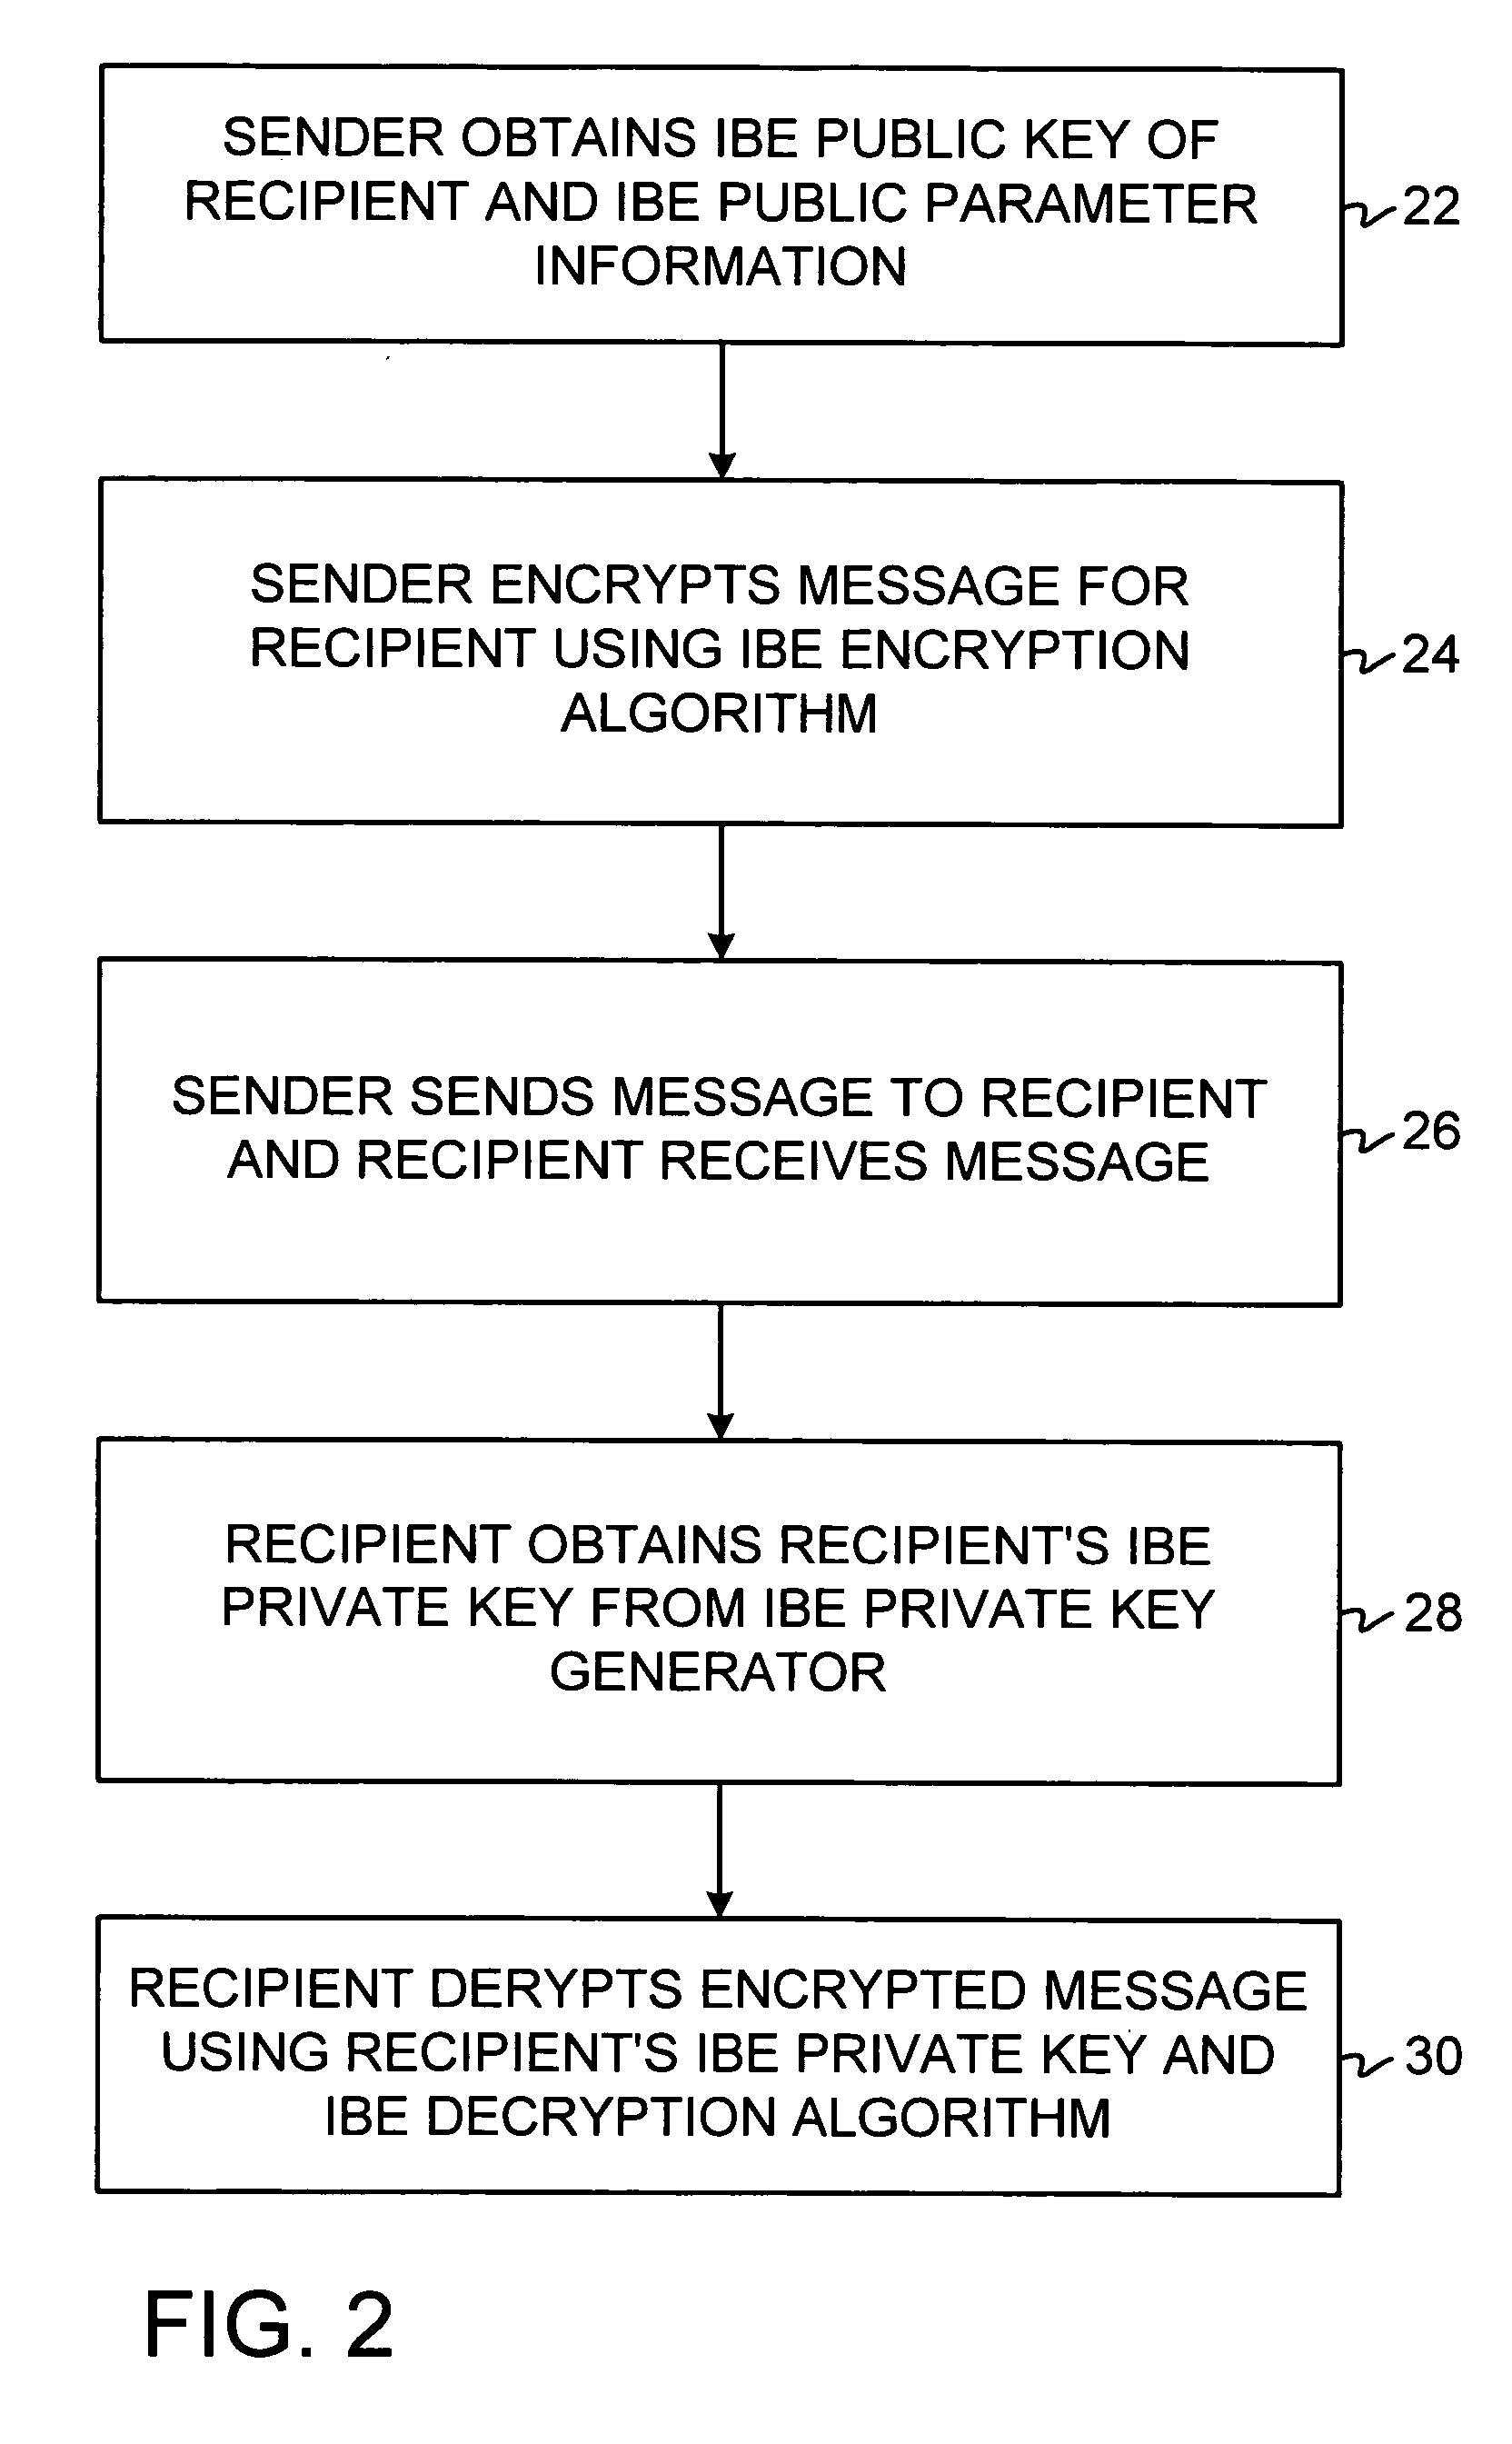 Identity-based-encryption system with district policy information